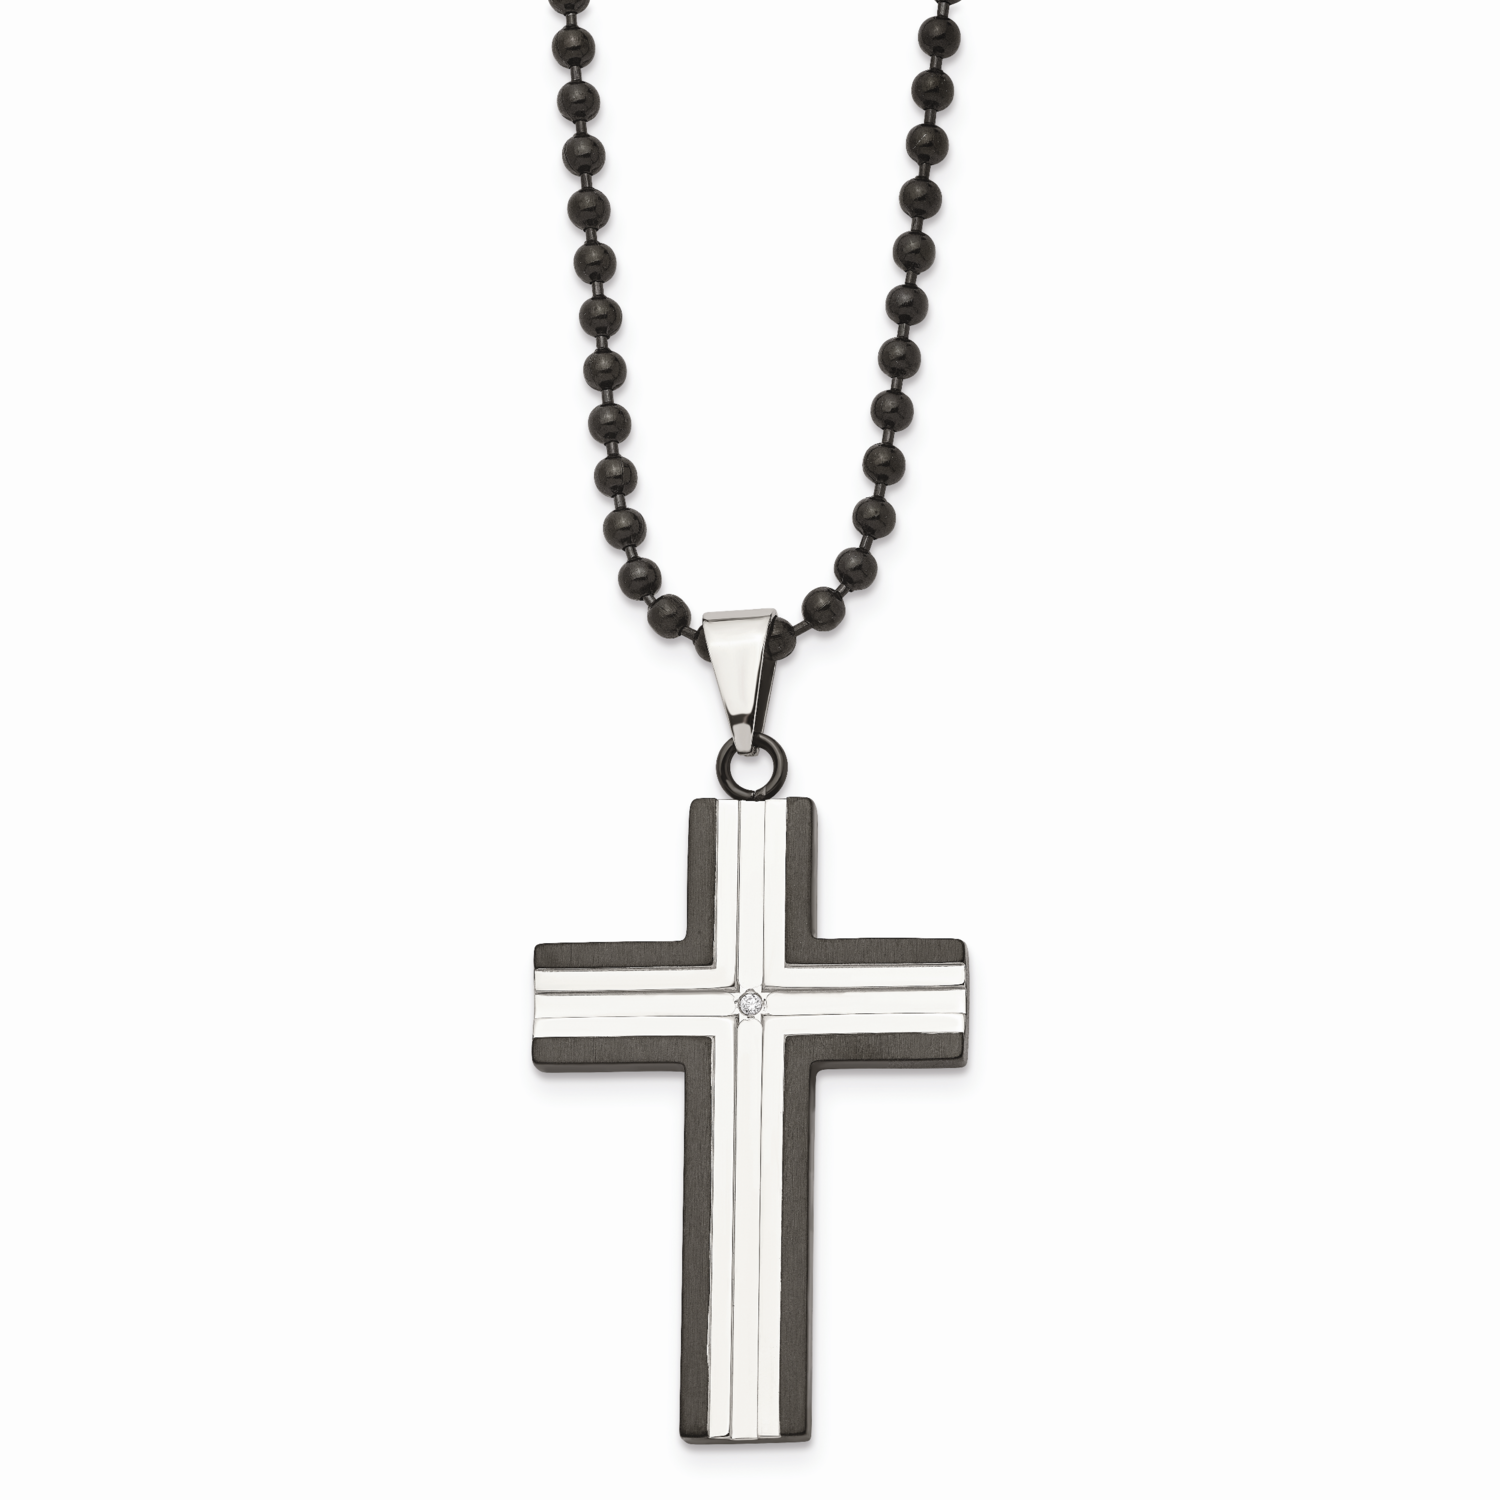 IP Black-plated CZ Stone Stone Cross Pendant Necklace Stainless Steel SRN863-30